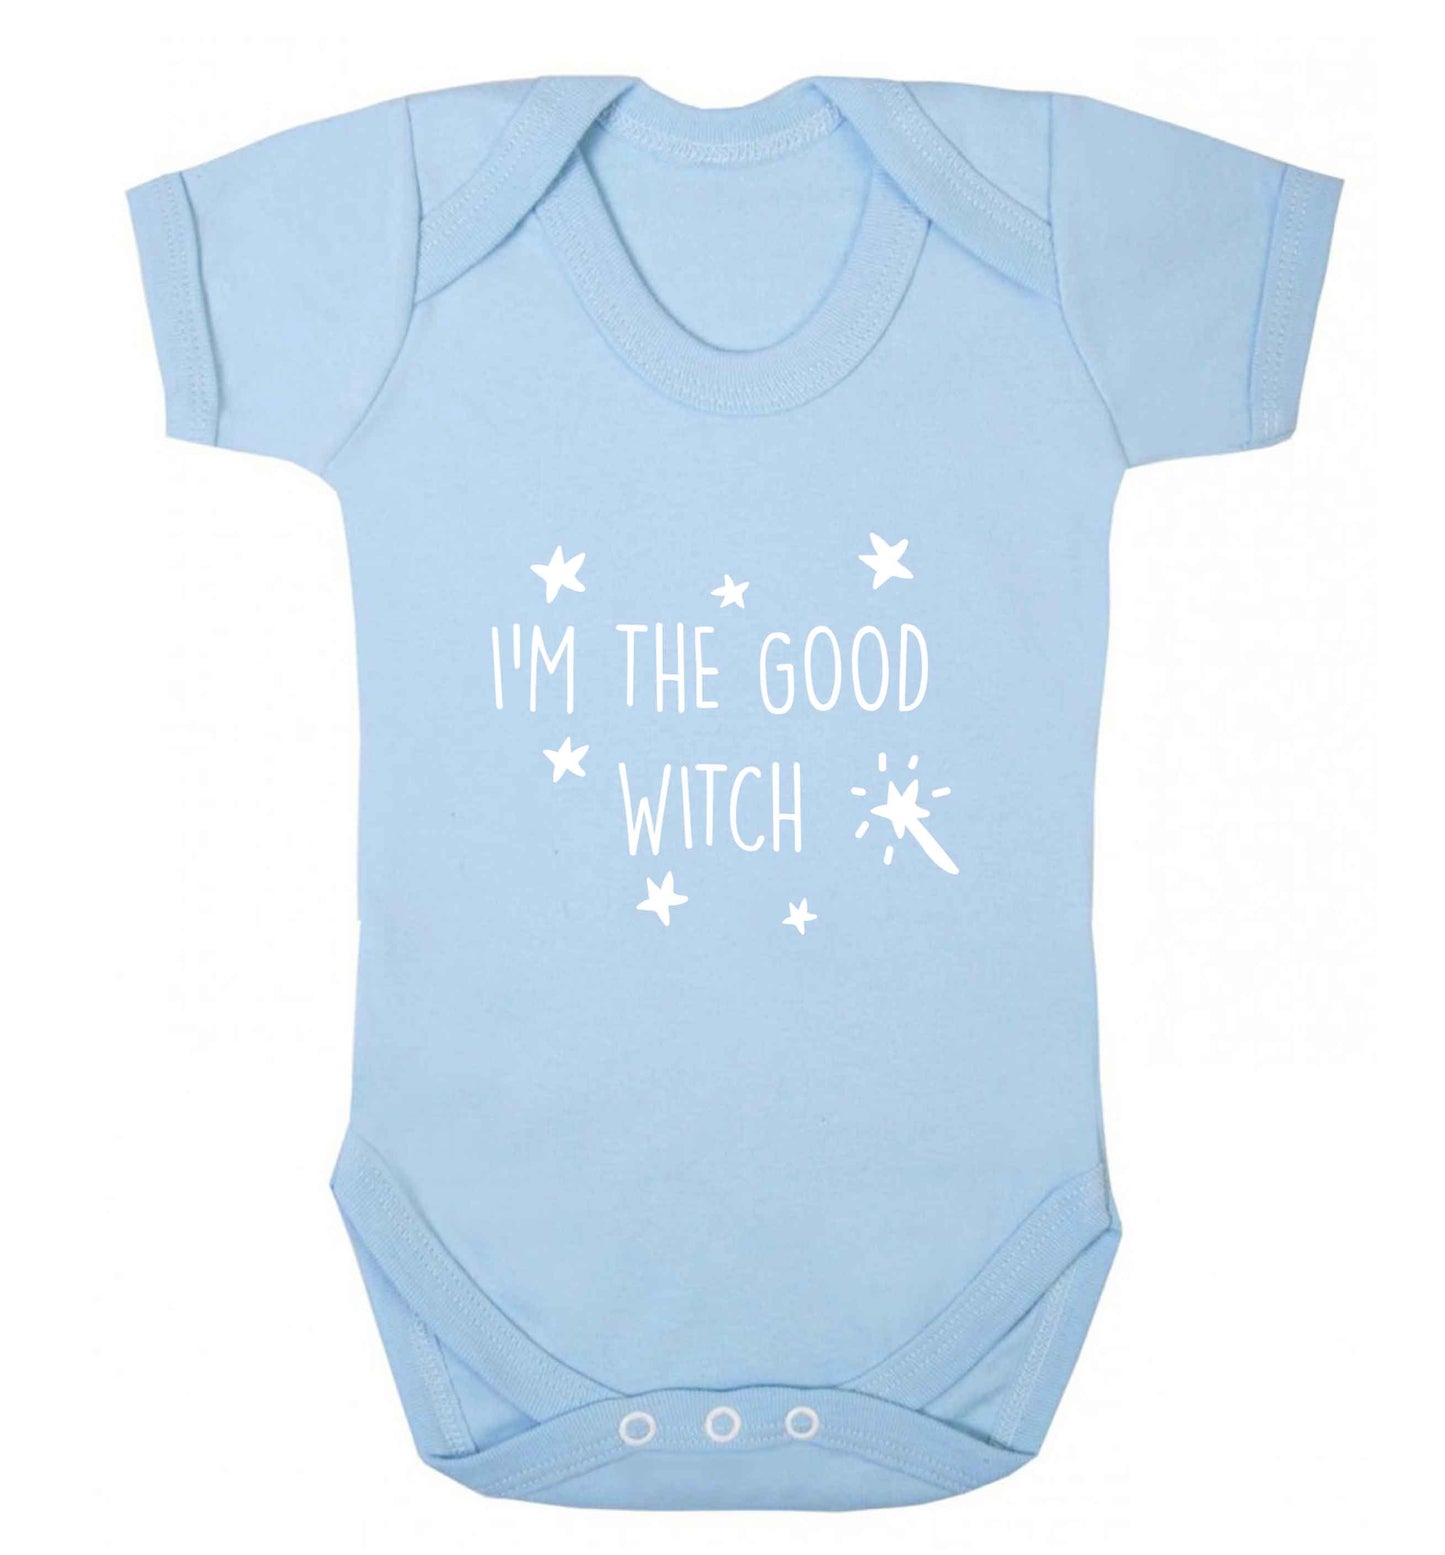 Good witch baby vest pale blue 18-24 months